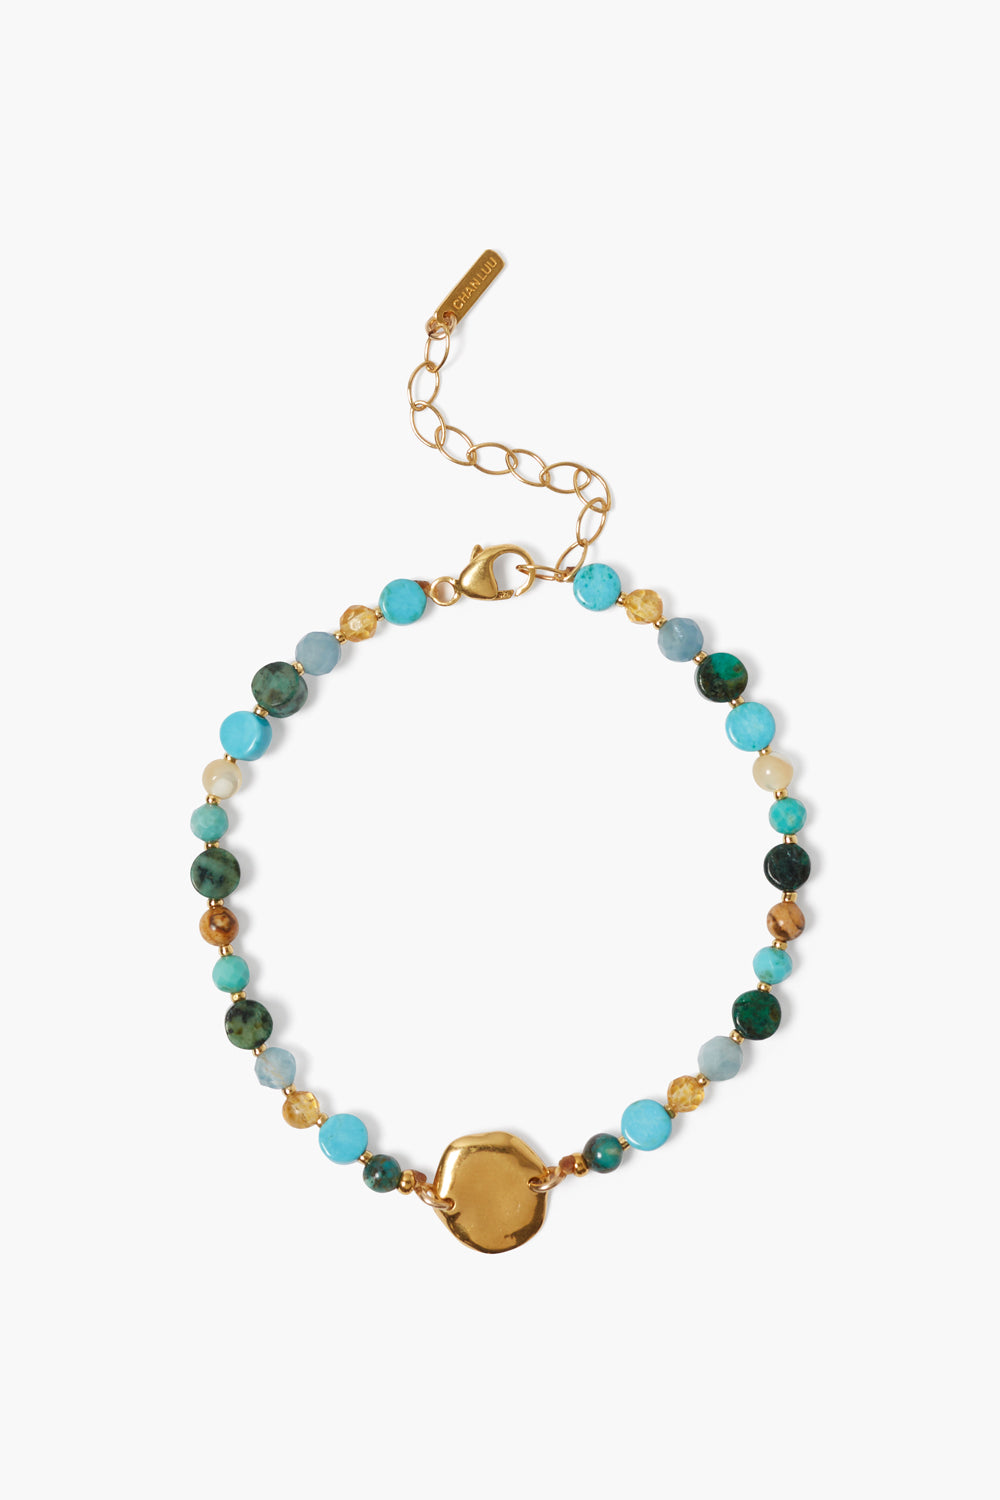 GOLD PLATED STERLING SILVER BRACELET-TURQUOISE MIX - Kingfisher Road - Online Boutique